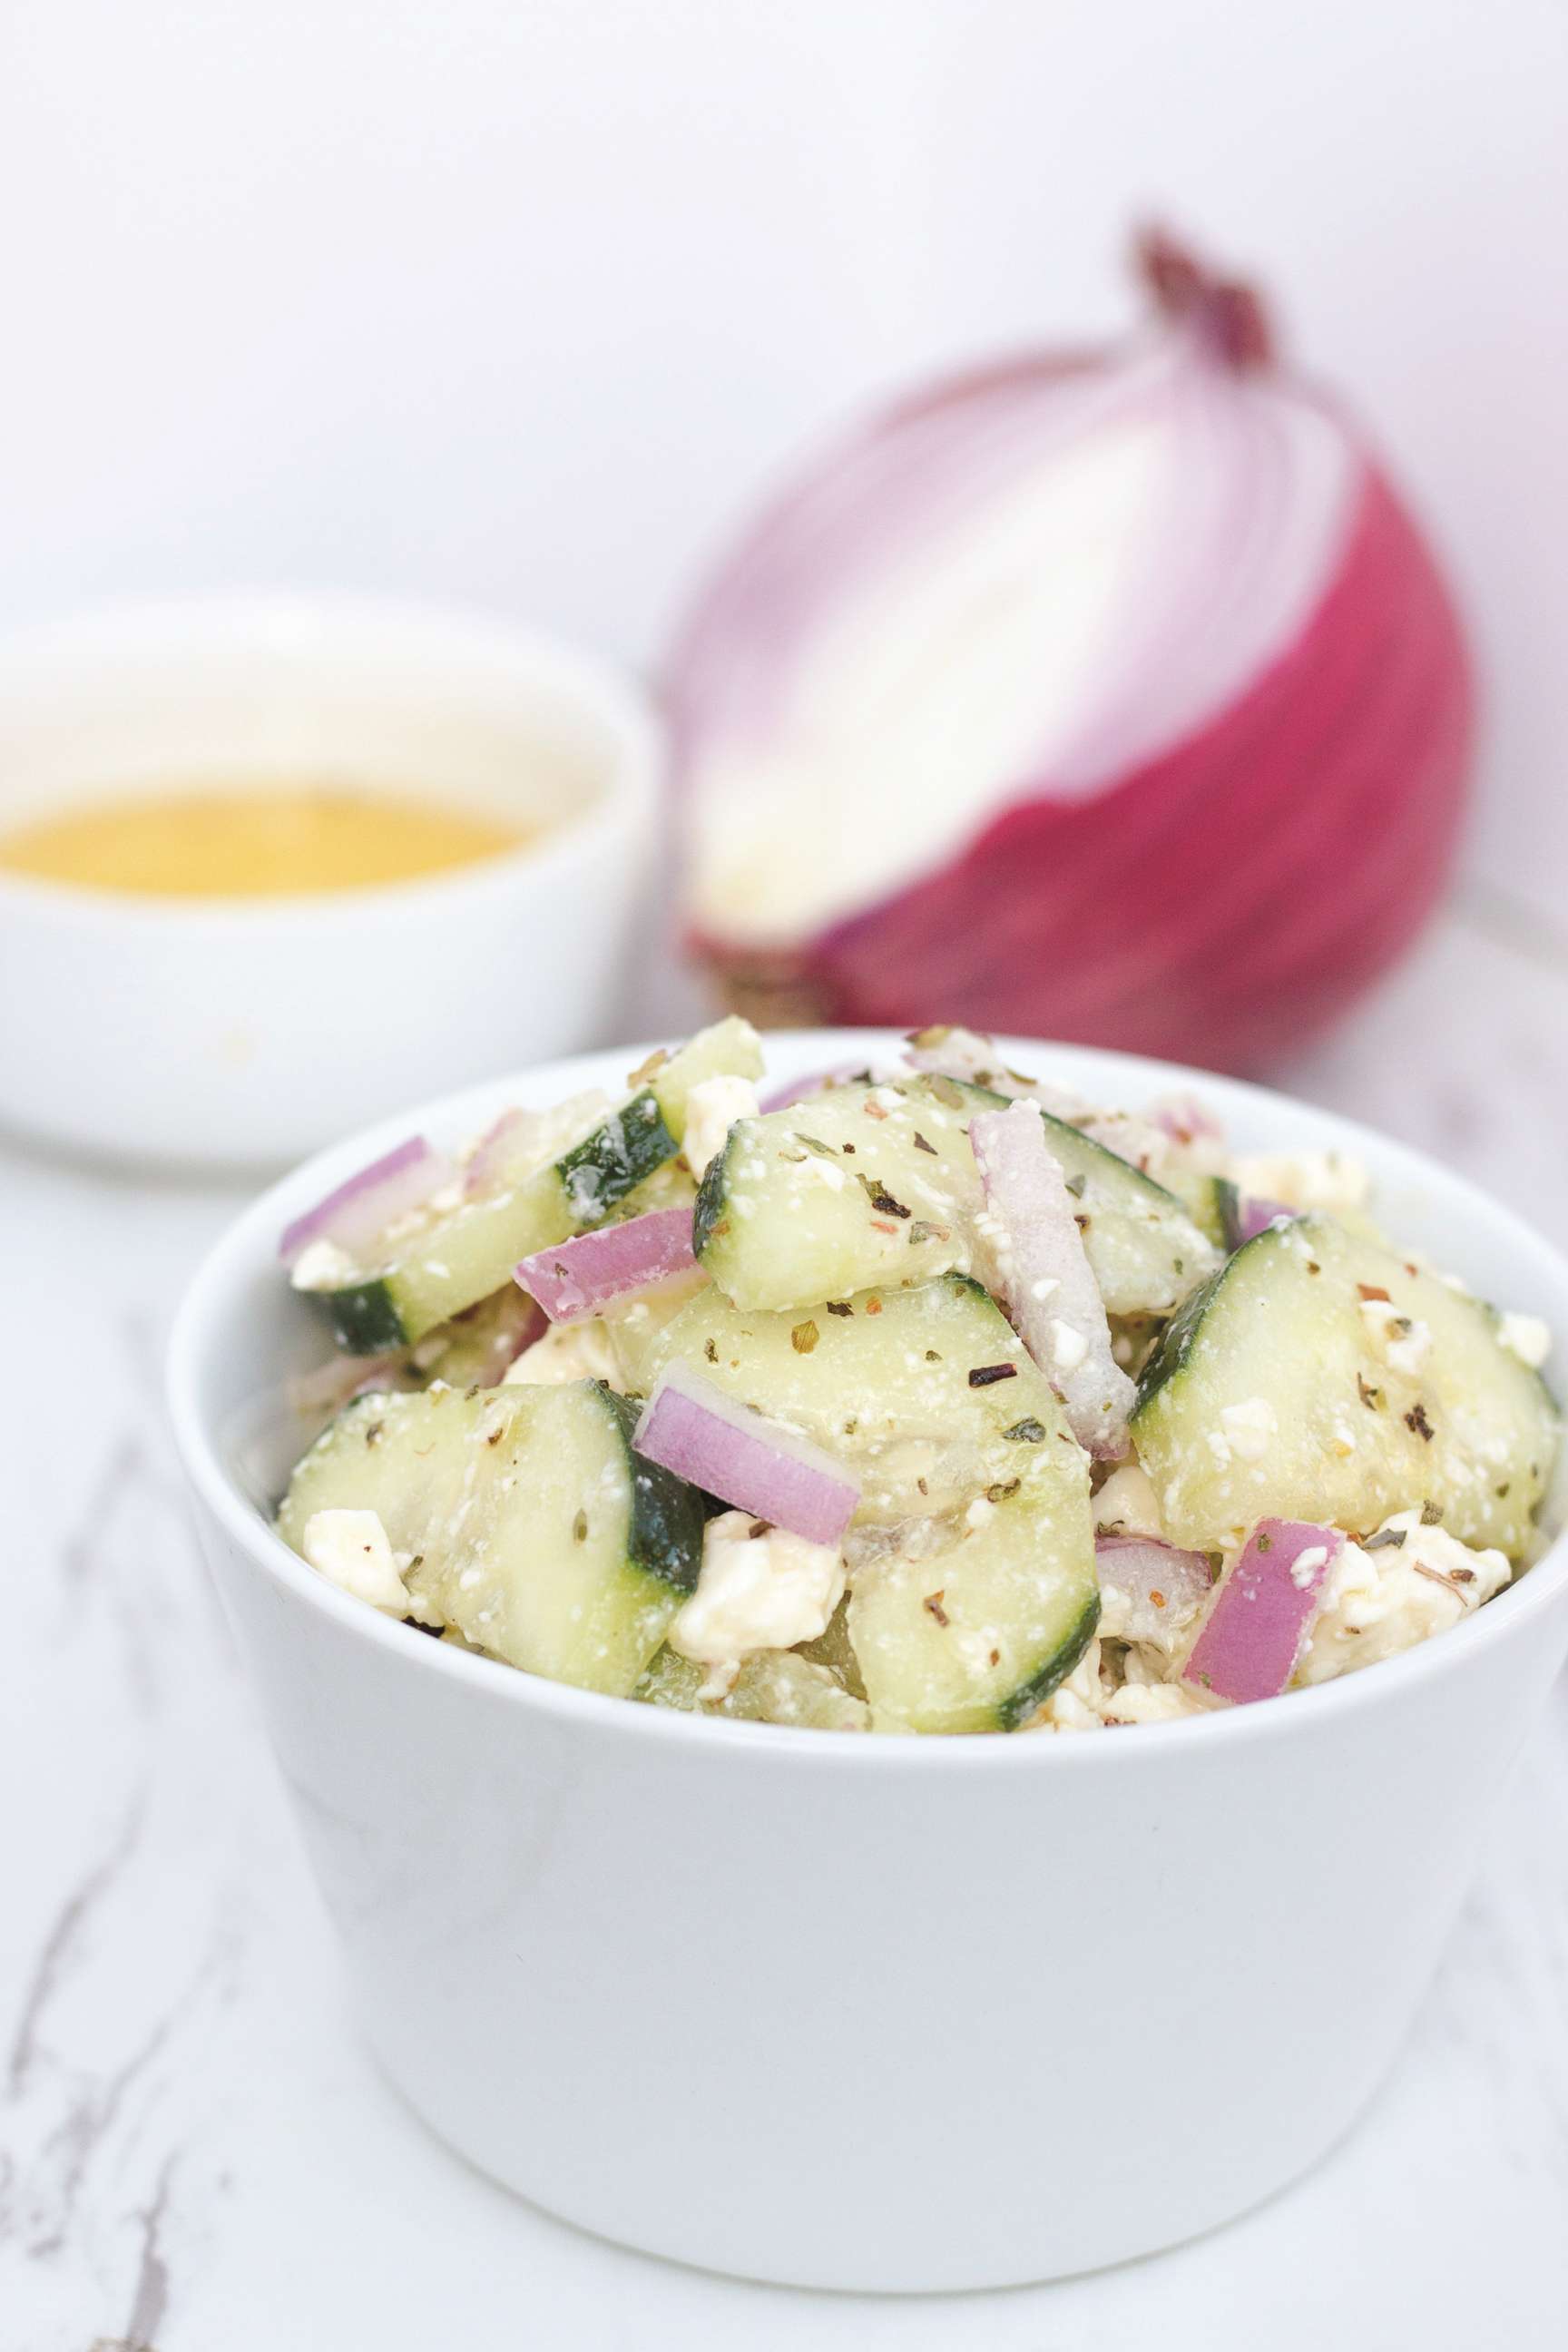 PHOTO: "Simply Keto" author Suzanne Ryan's recipe for cucumber salad with feta.